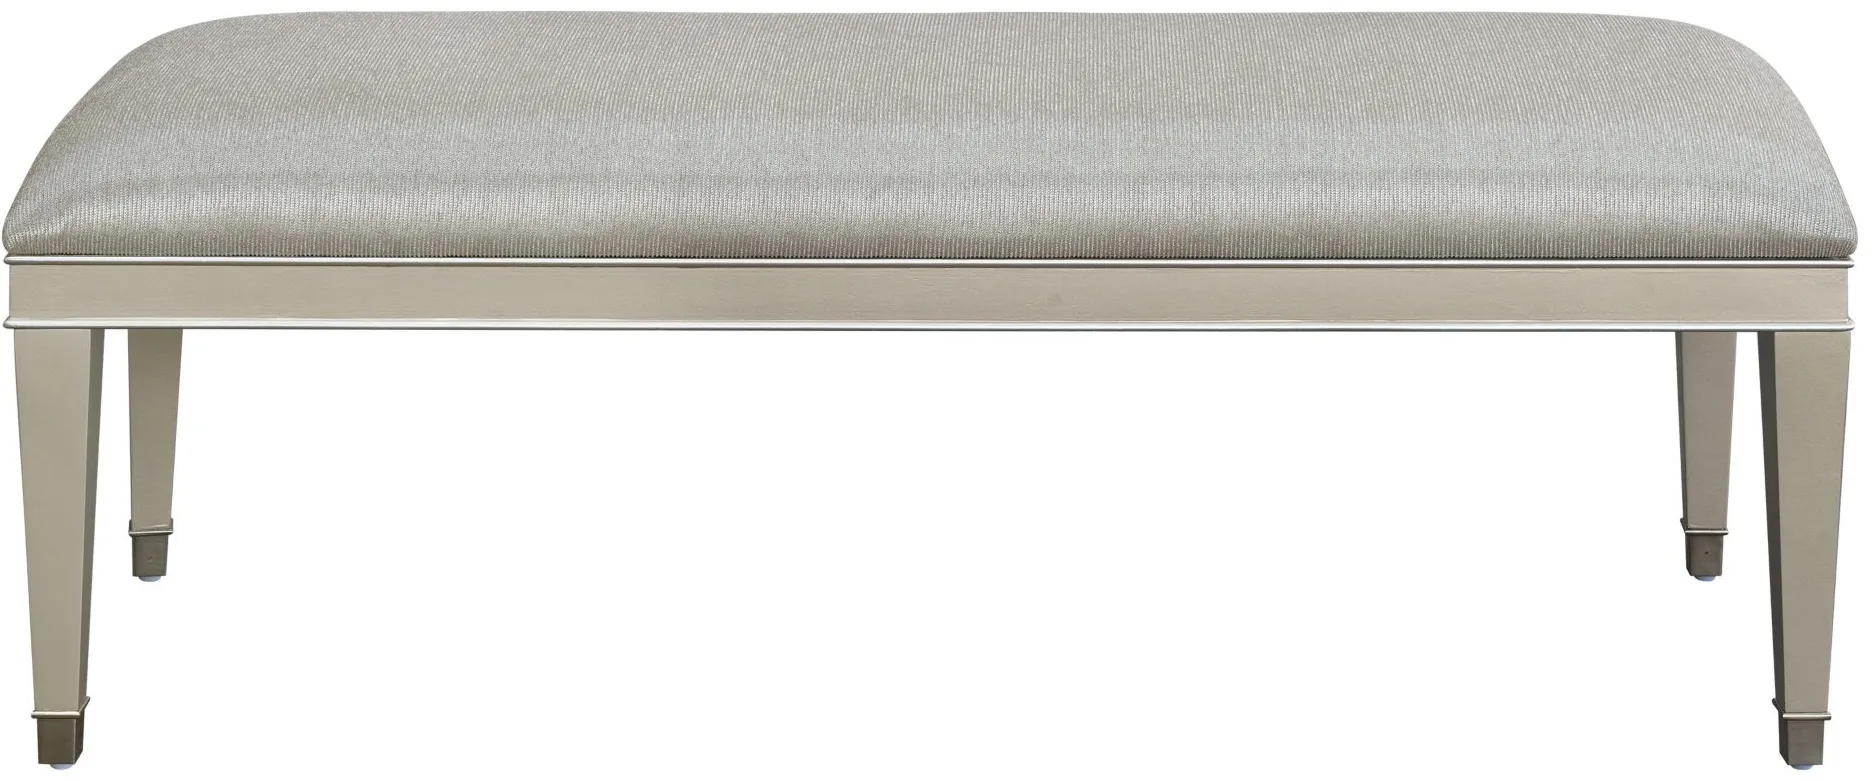 Zoey Bed Bench in Silver by Bellanest.